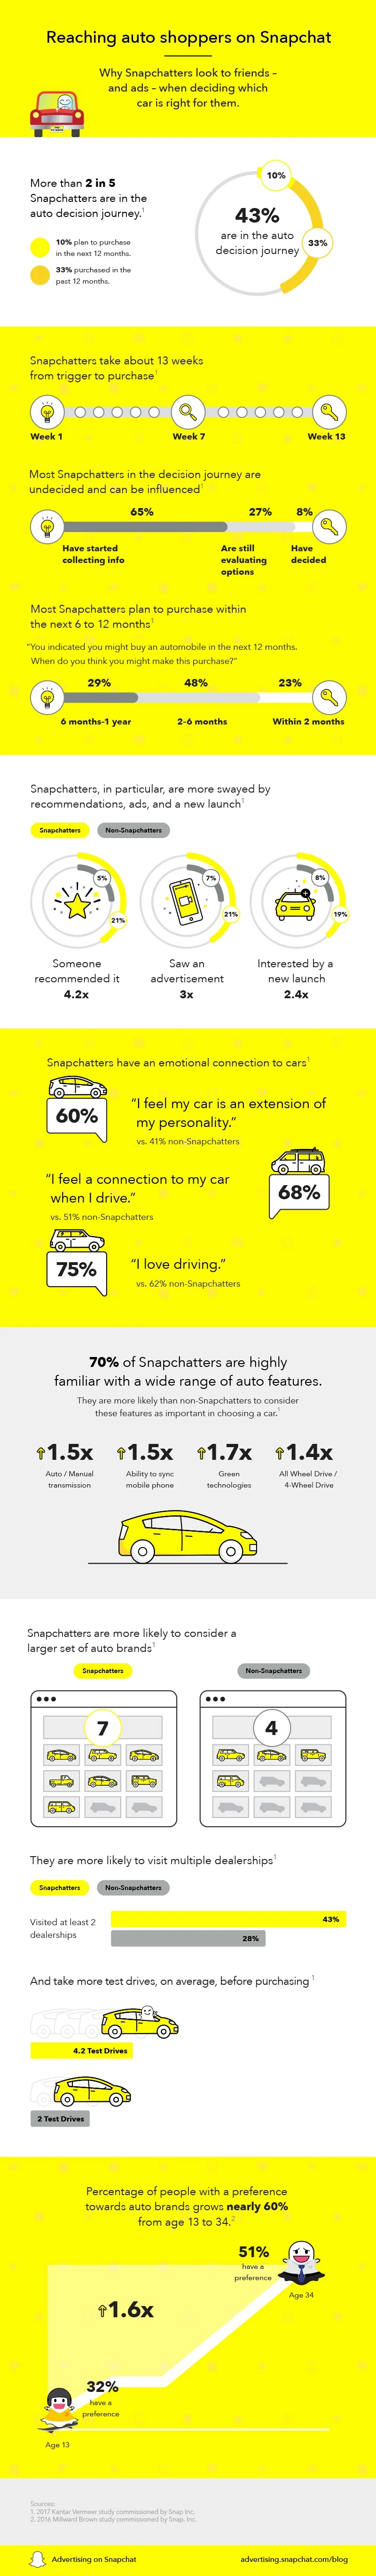 Reaching auto shoppers on #Snapchat [infographic]